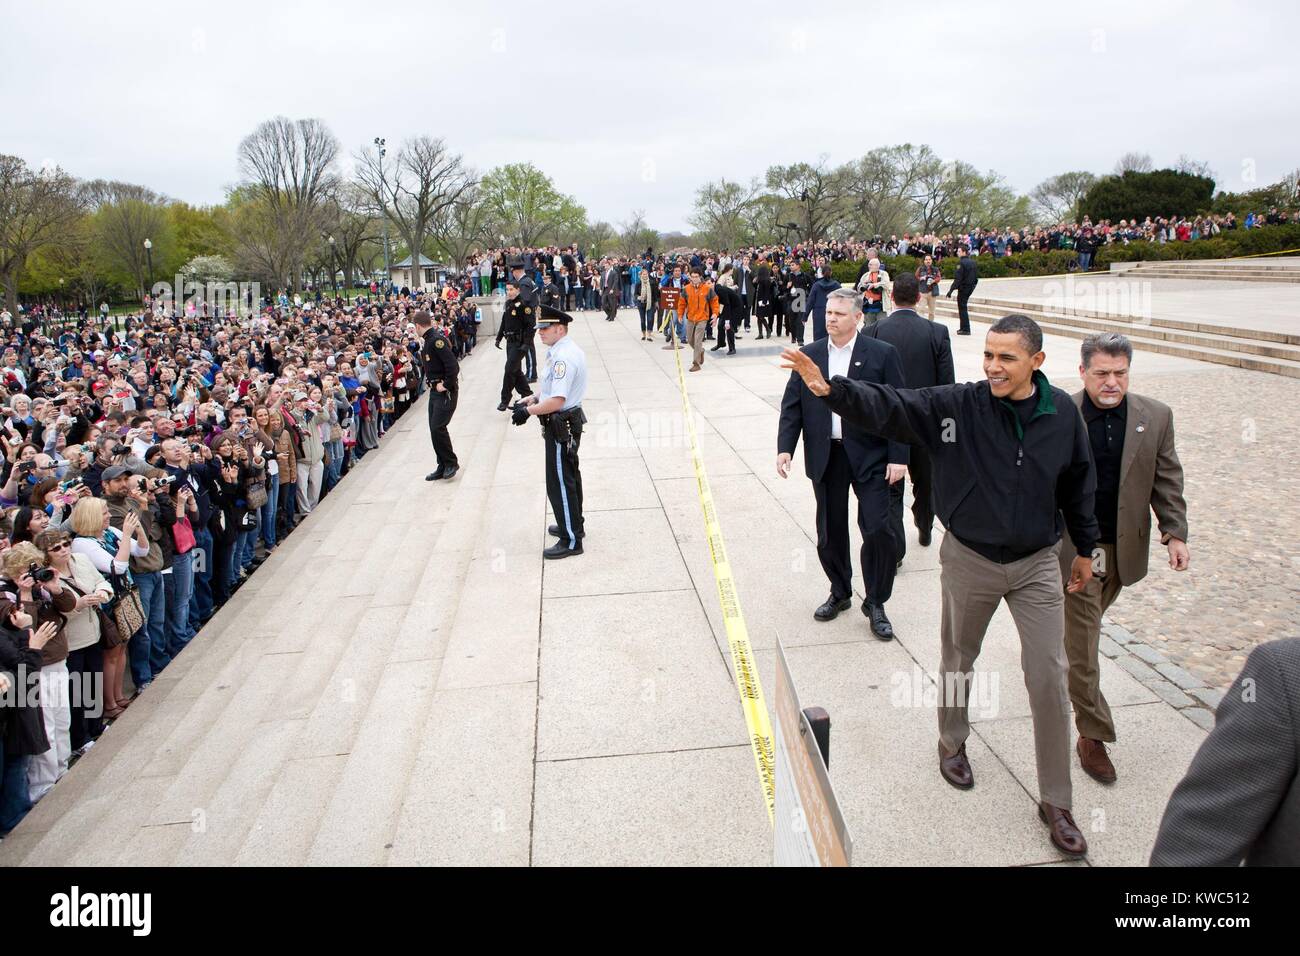 President Barack Obama waves to tourists at the Lincoln Memorial in Washington, D.C., April 9, 2011. On the previous day, Obama and Congressional leaders agreed on a bill to prevent a threatened government shutdown. (BSLOC 2015 13 216) Stock Photo